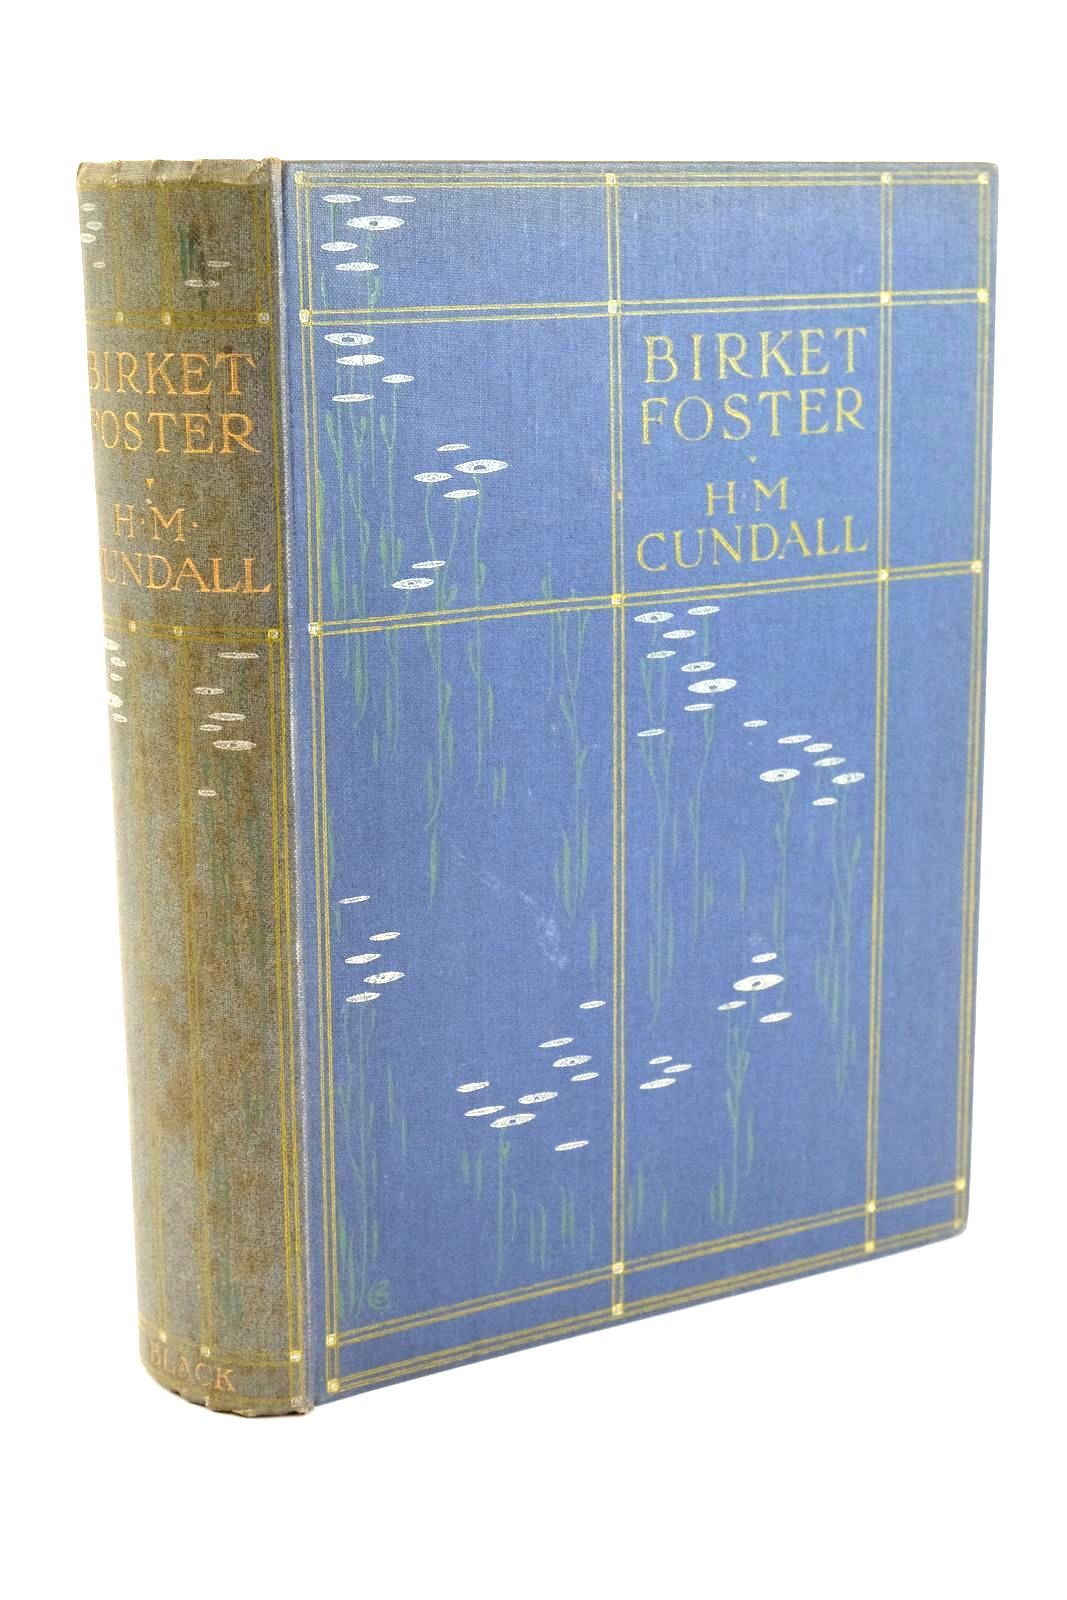 Photo of BIRKET FOSTER R.W.S written by Cundall, H.M. illustrated by Foster, Birket published by Adam &amp; Charles Black (STOCK CODE: 1324078)  for sale by Stella & Rose's Books